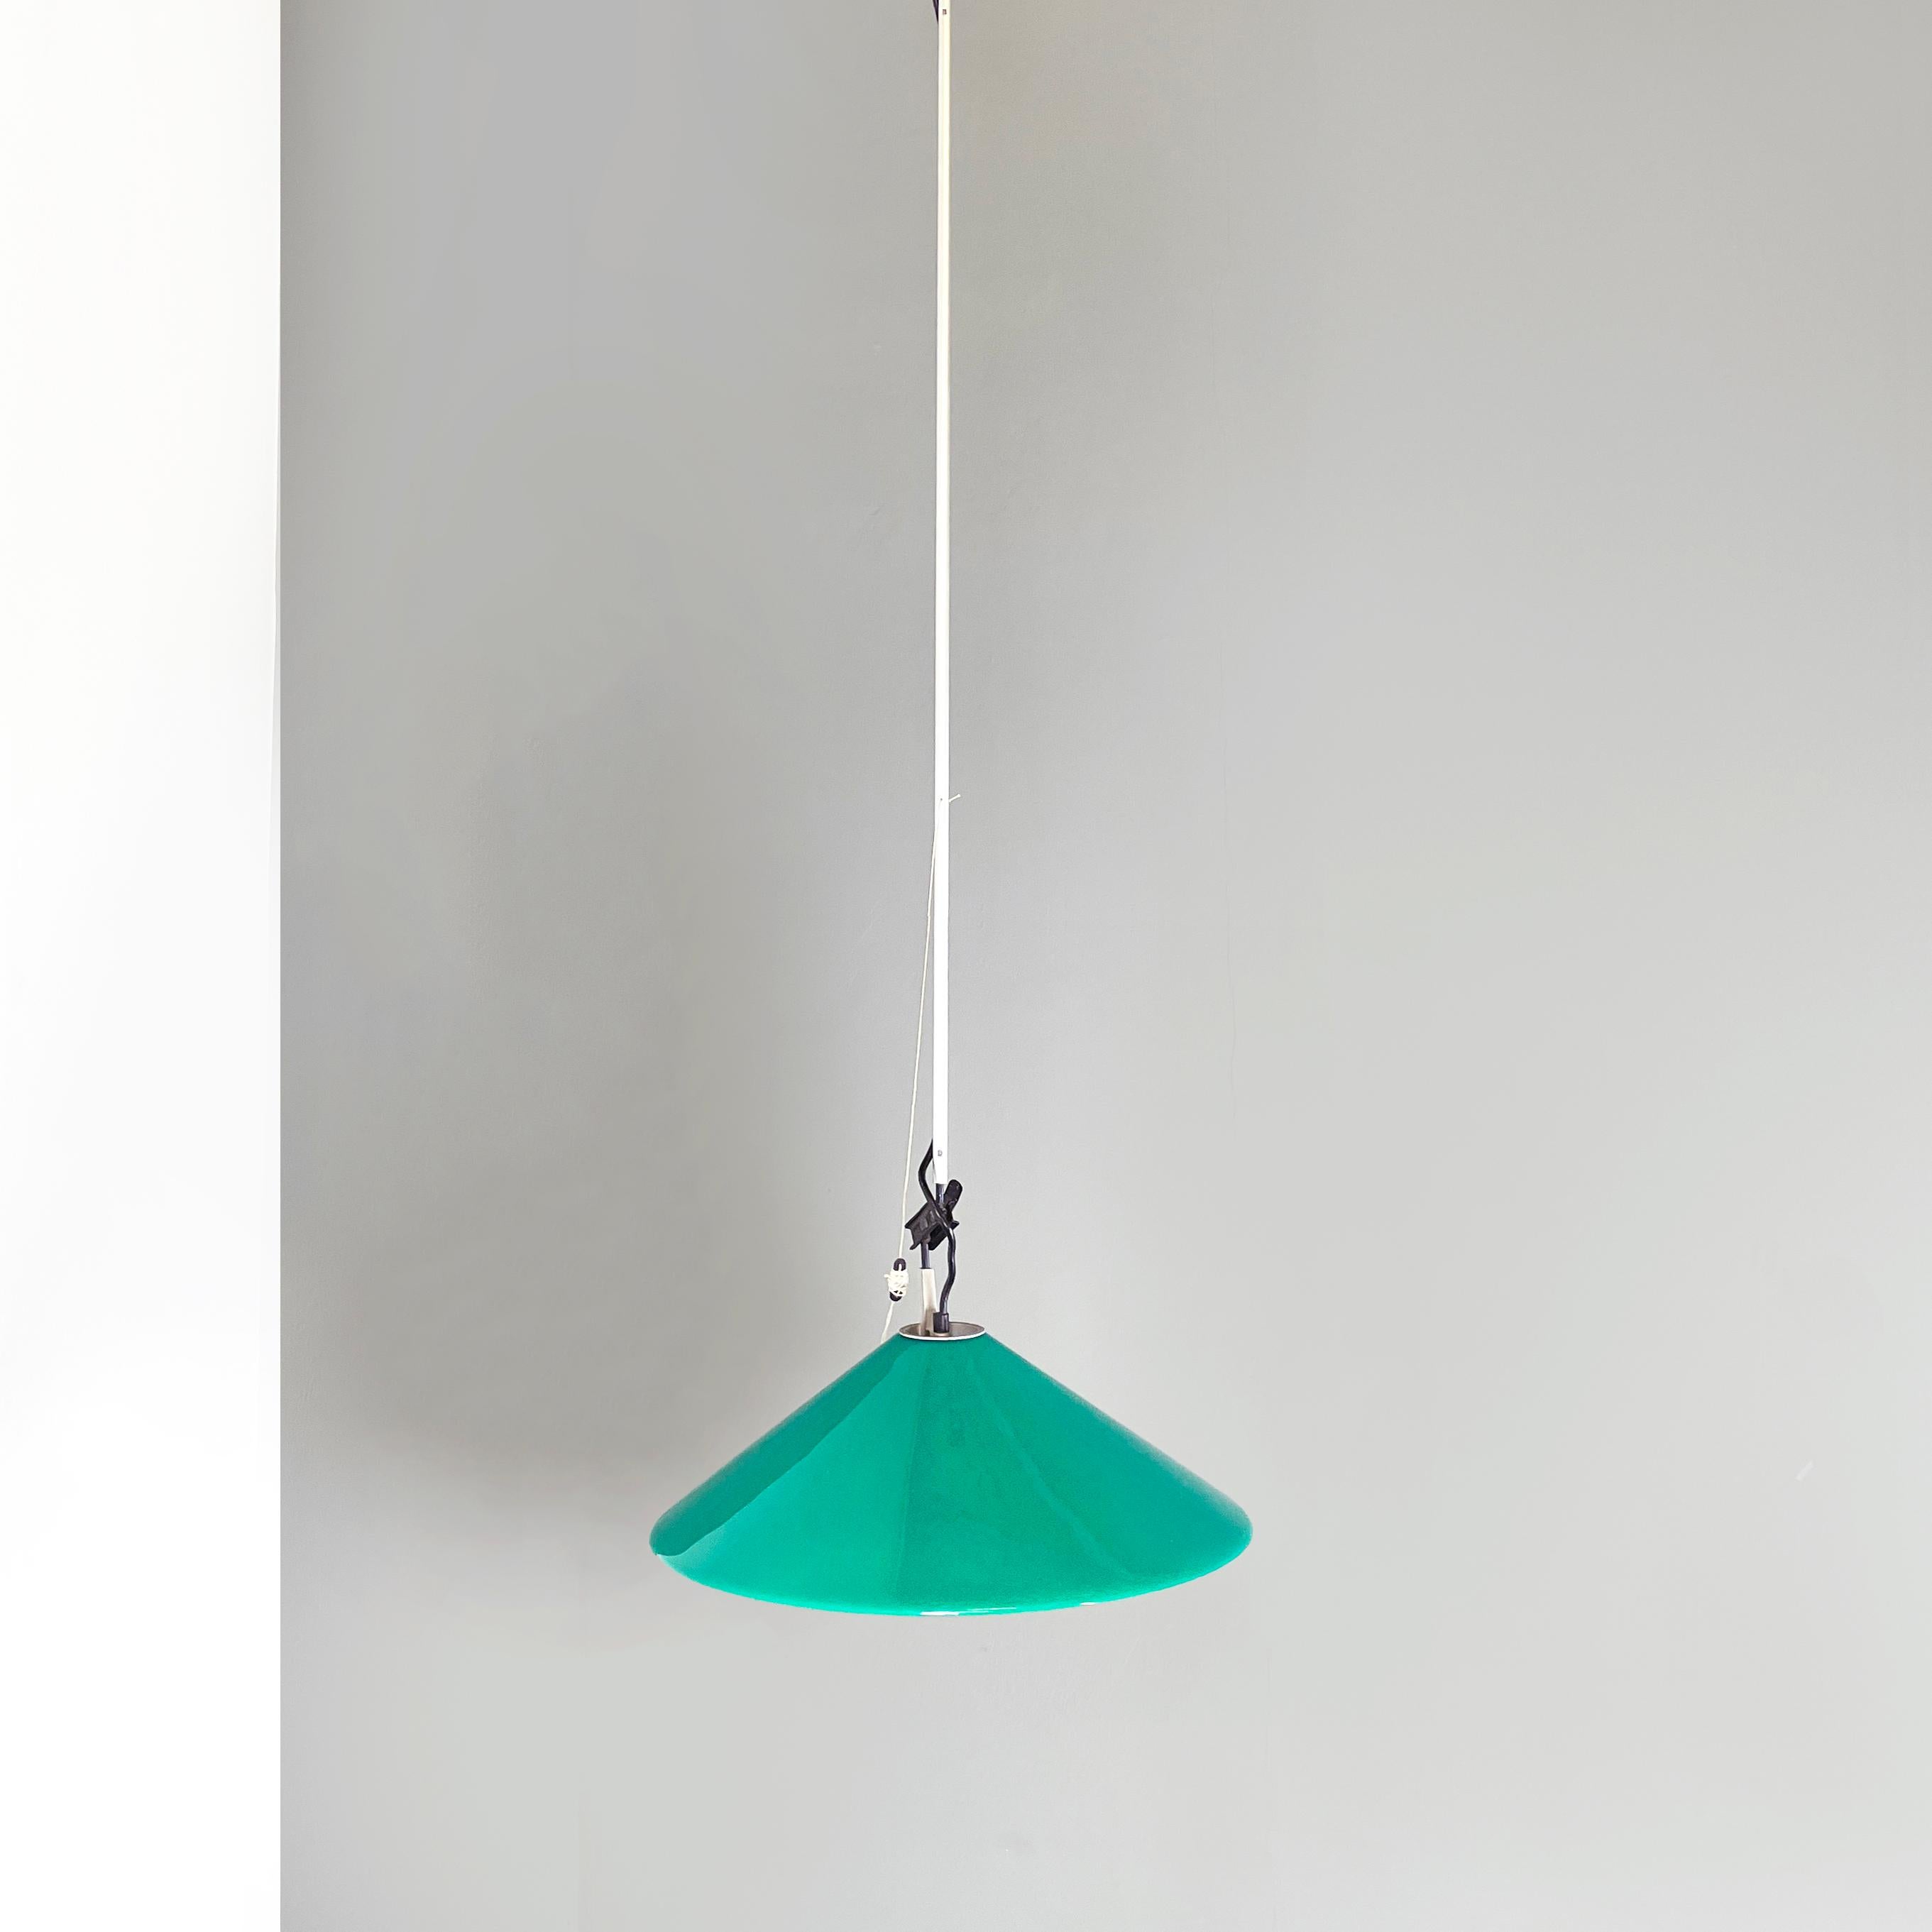 Italian space age Chandelier Aggregato by Enzo Mari and Giancarlo Fassina for Artemide, 1970s
Chandelier mod. Aggregato with conical plexiglass diffuser, externally aqua green and internally white. The structure is composed of a chromed metal